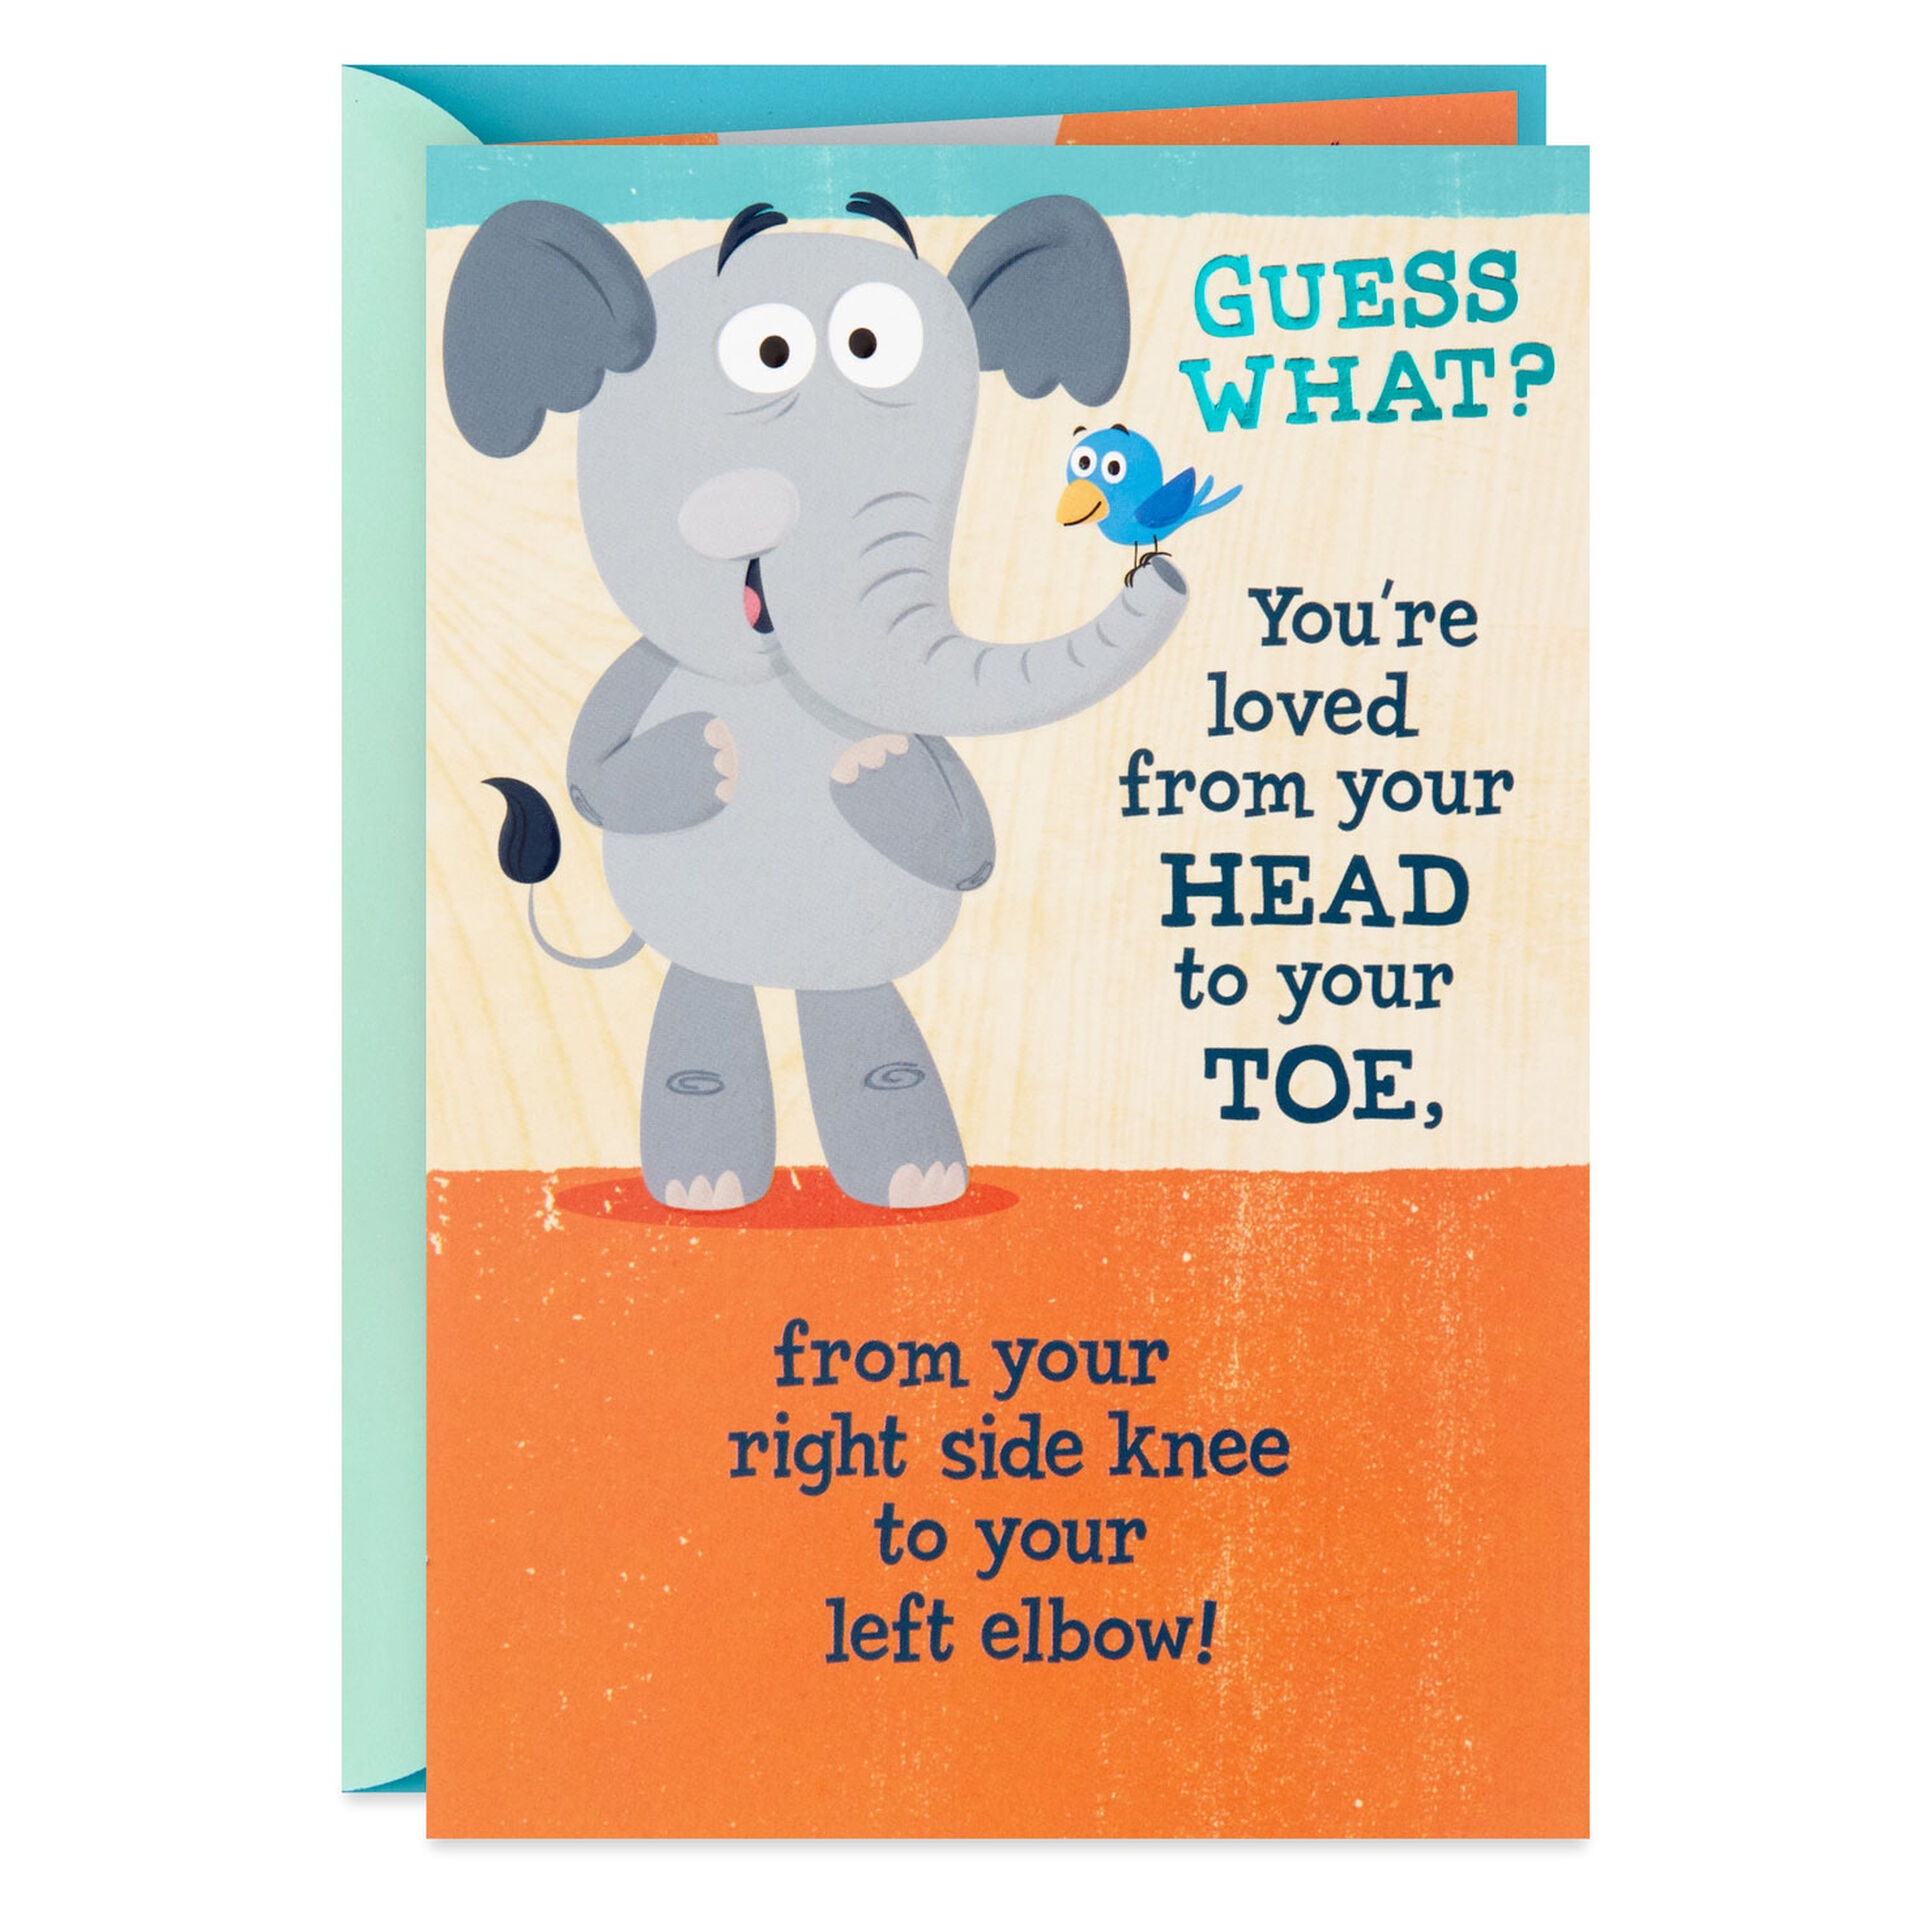 Loved-From-Head-Encouragement-Card-Kids_399CEY2326_01